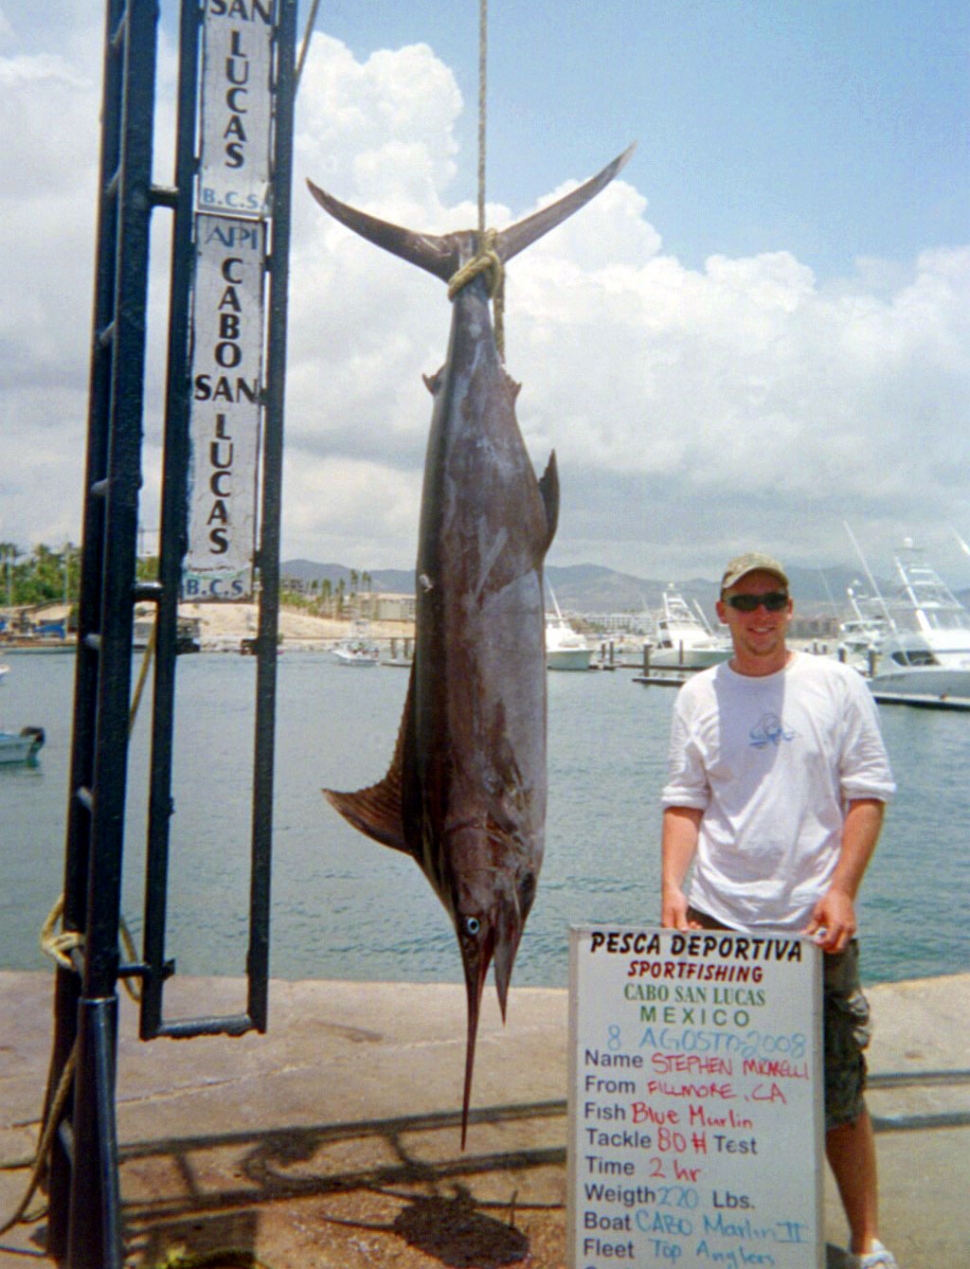 This 220 lb. Blue Marlin was caught by Fillmore native Steve Micarelli off the coast of Cabo San Lucas while on vacation August 8, 2008 with no help from Rex Wilson or Ray Hoover.